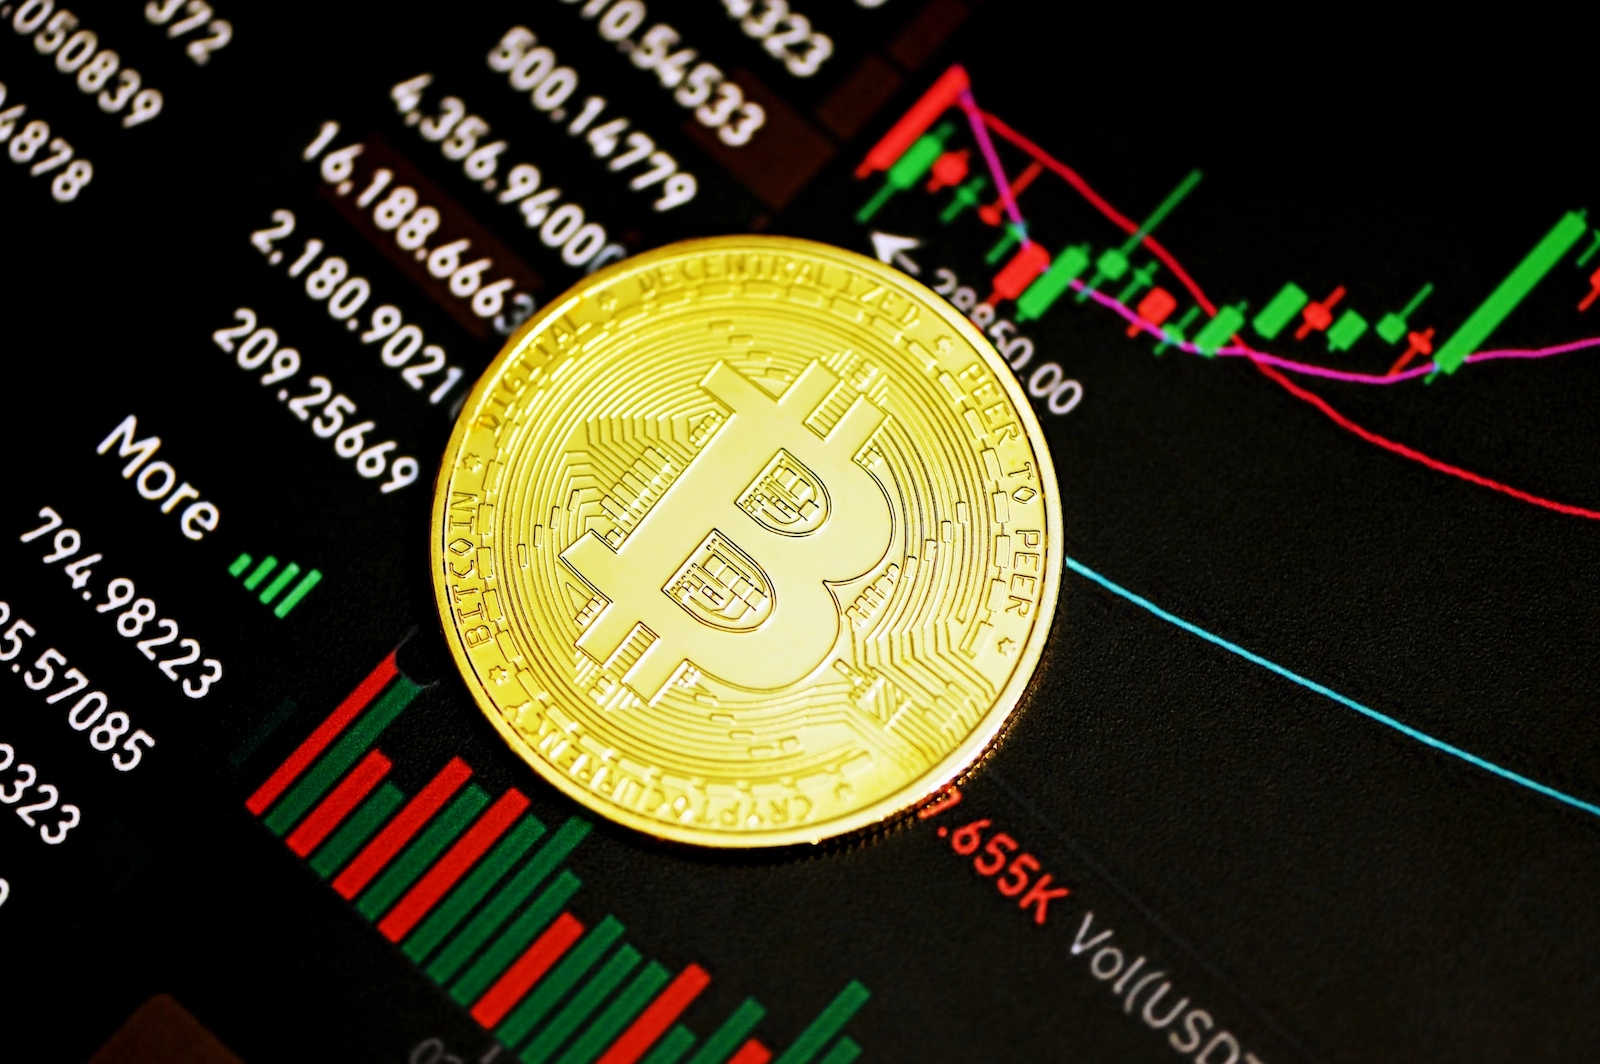 Bitcoin price might be headed for a significant fall, warn analysts